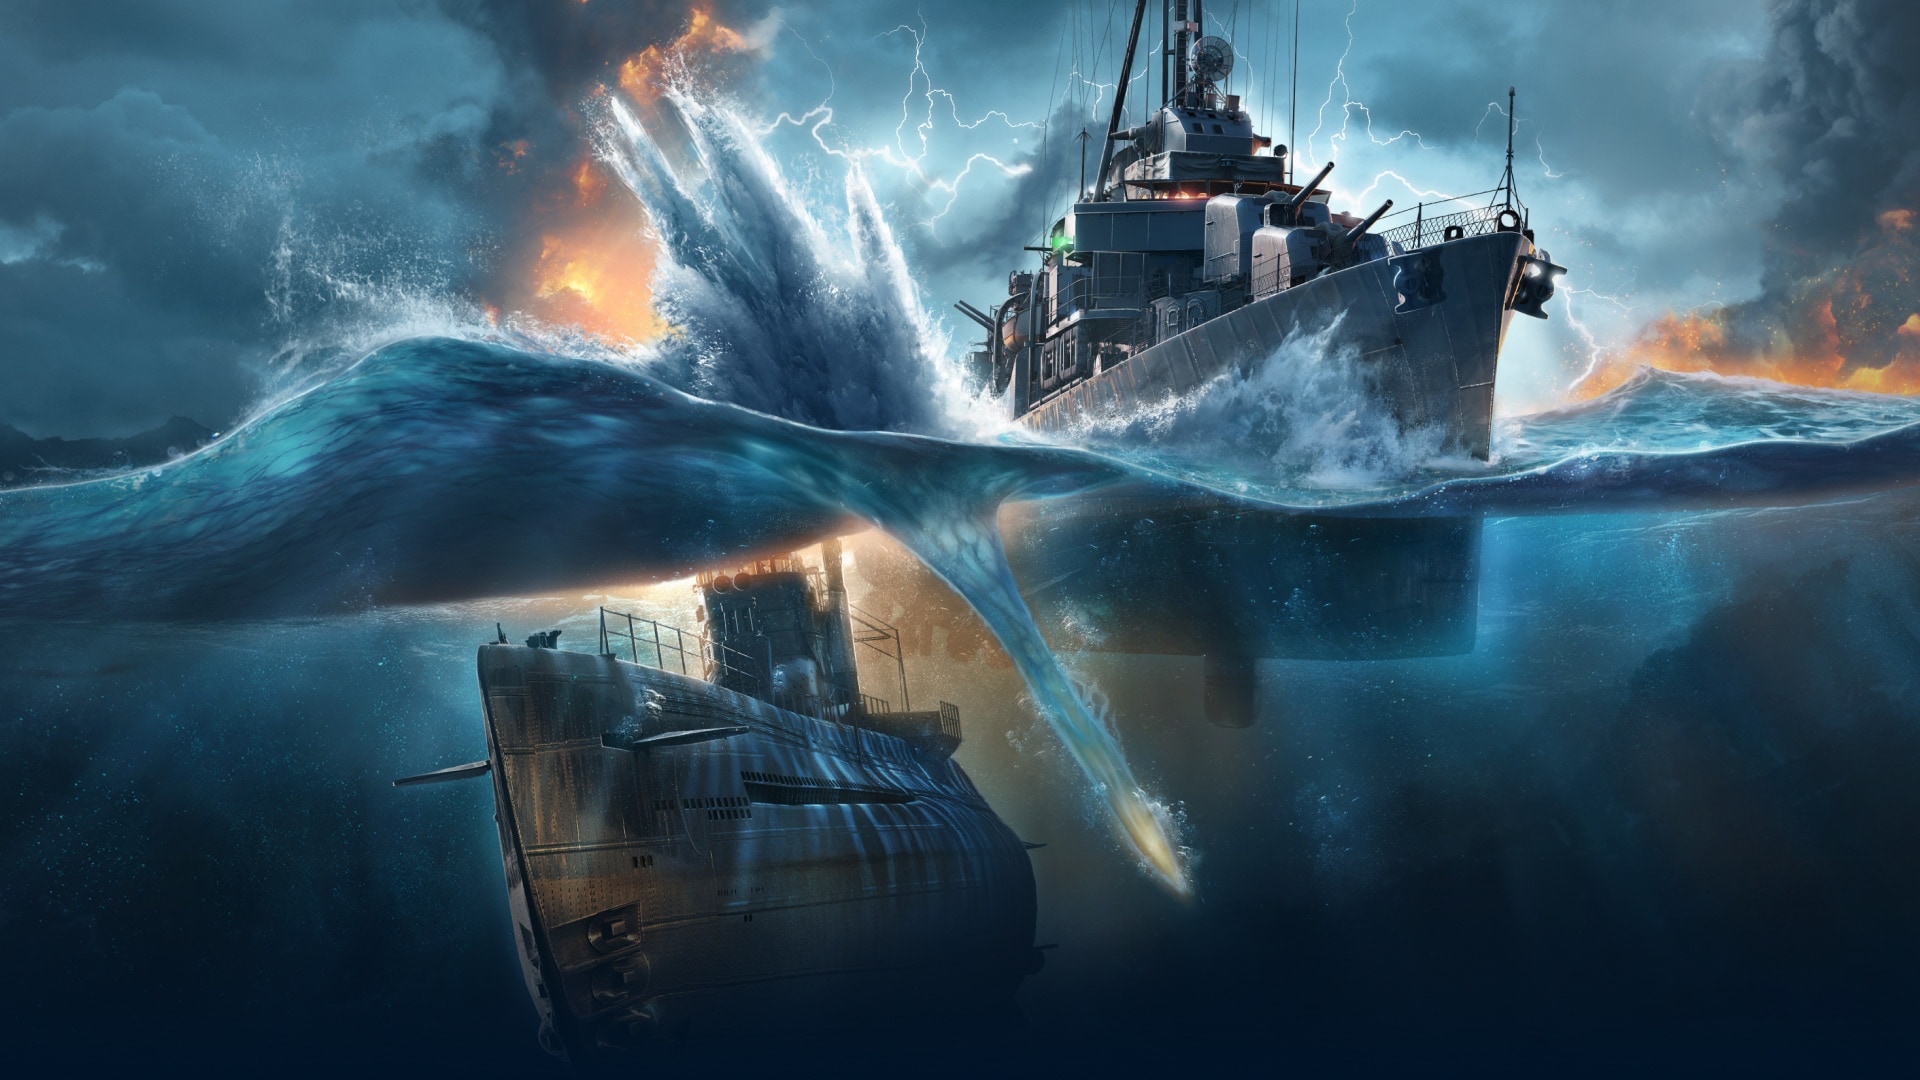 how to manually aim torpedoes in world of warships